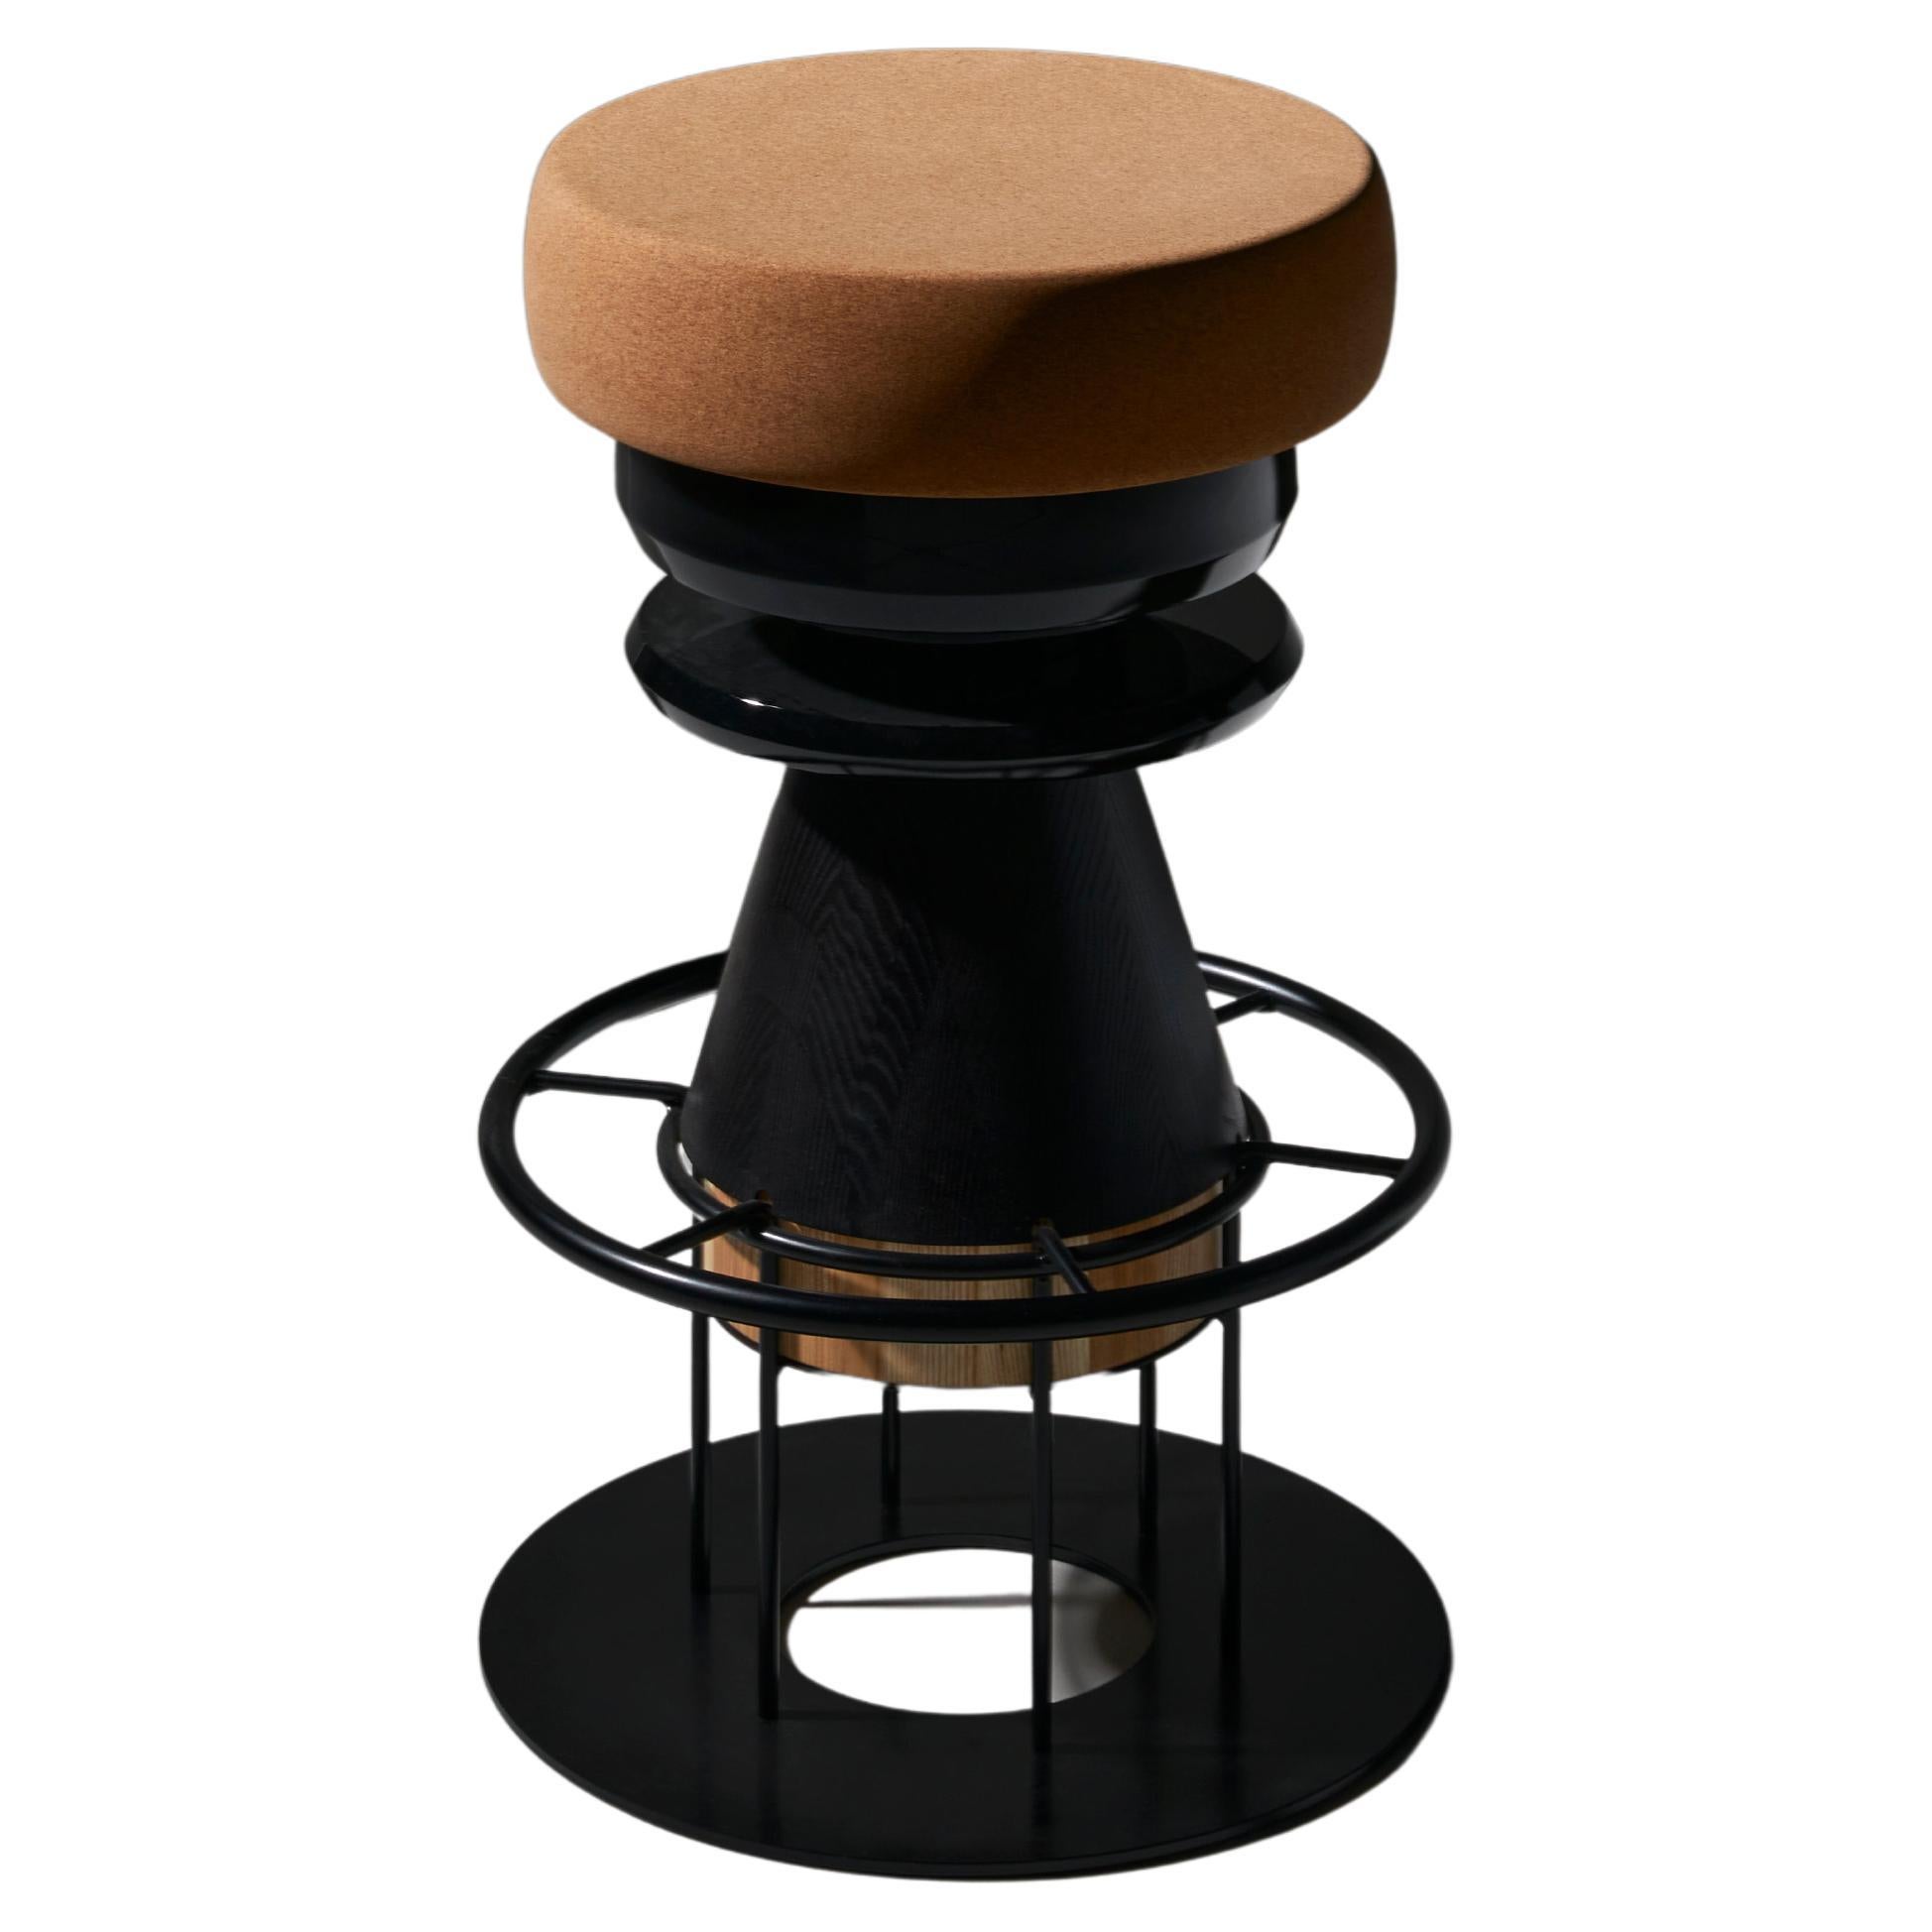 Tembo Stool, Shades of Black, by Note Design Studio for La Chance